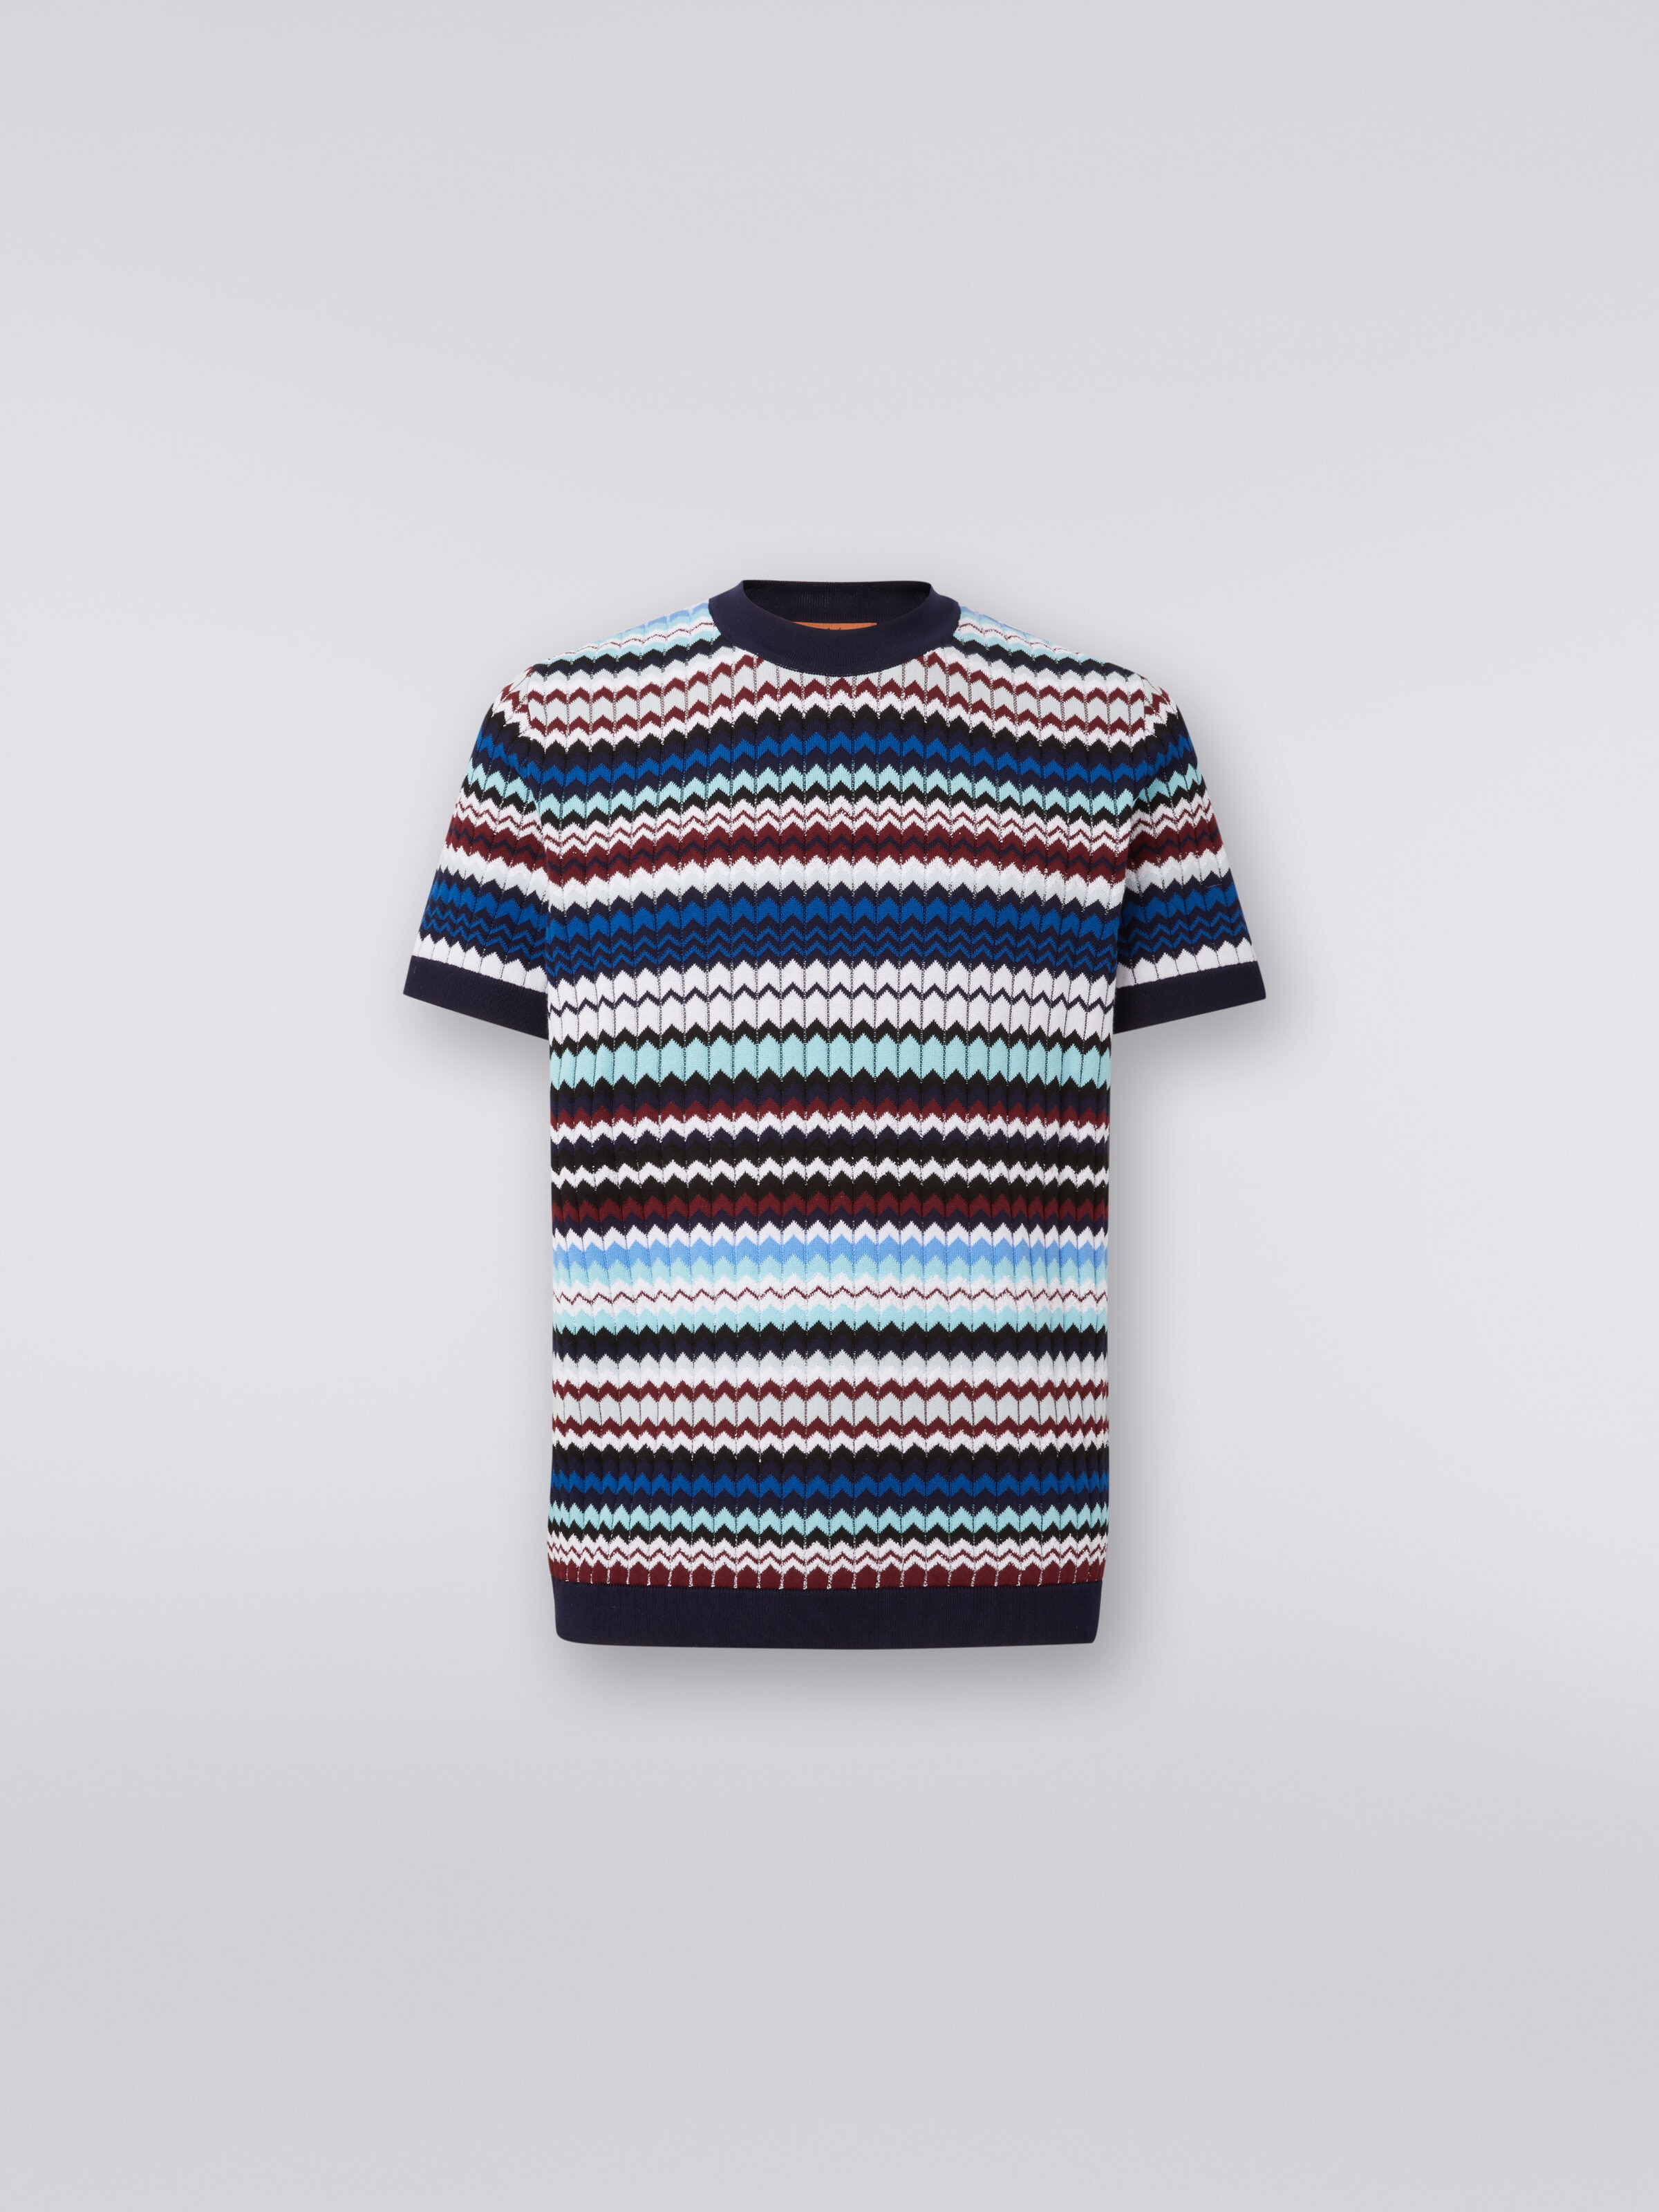 T-shirt in ribbed zigzag cotton knit, Multicoloured  - 0